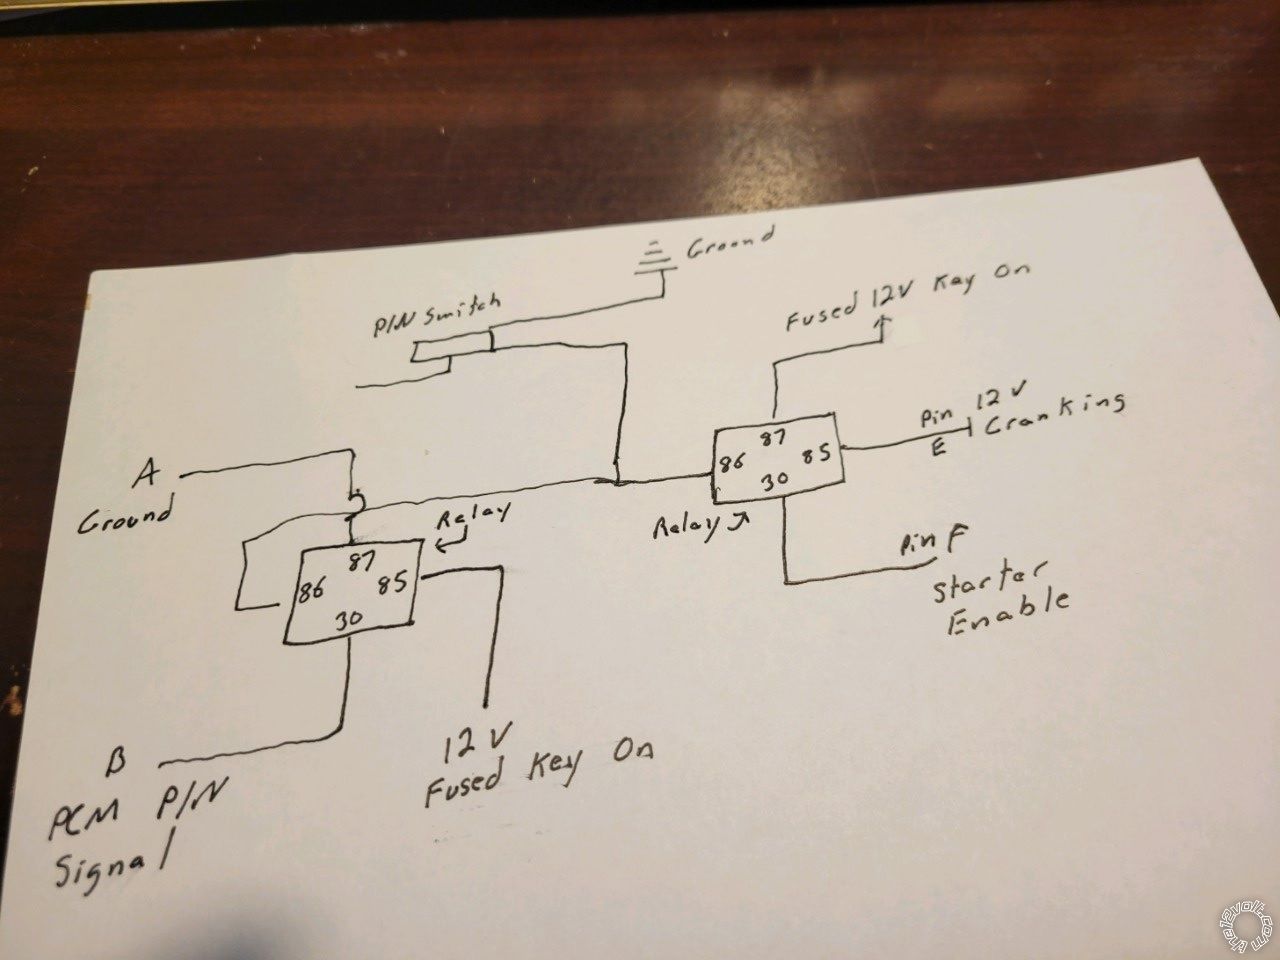 How To Use A DPDT Relay With One Microswitch? -- posted image.